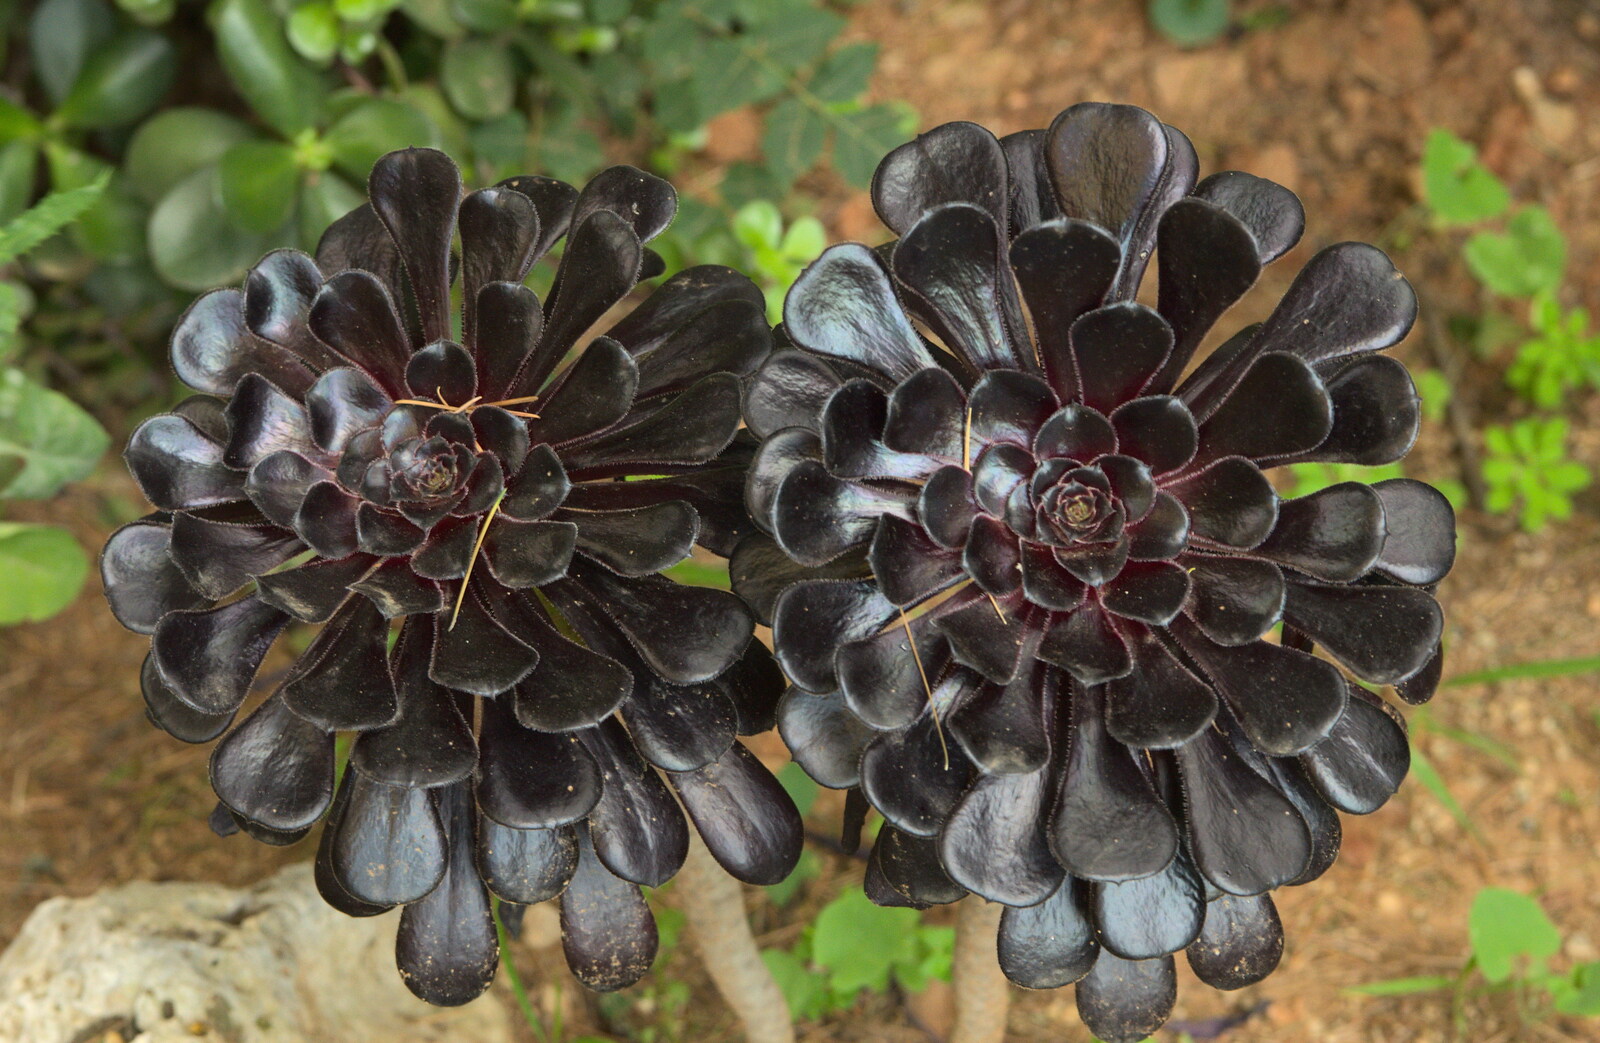 Weird almost-black flowers from The Open Education Challenge, Barcelona, Catalonia - 13th July 2014